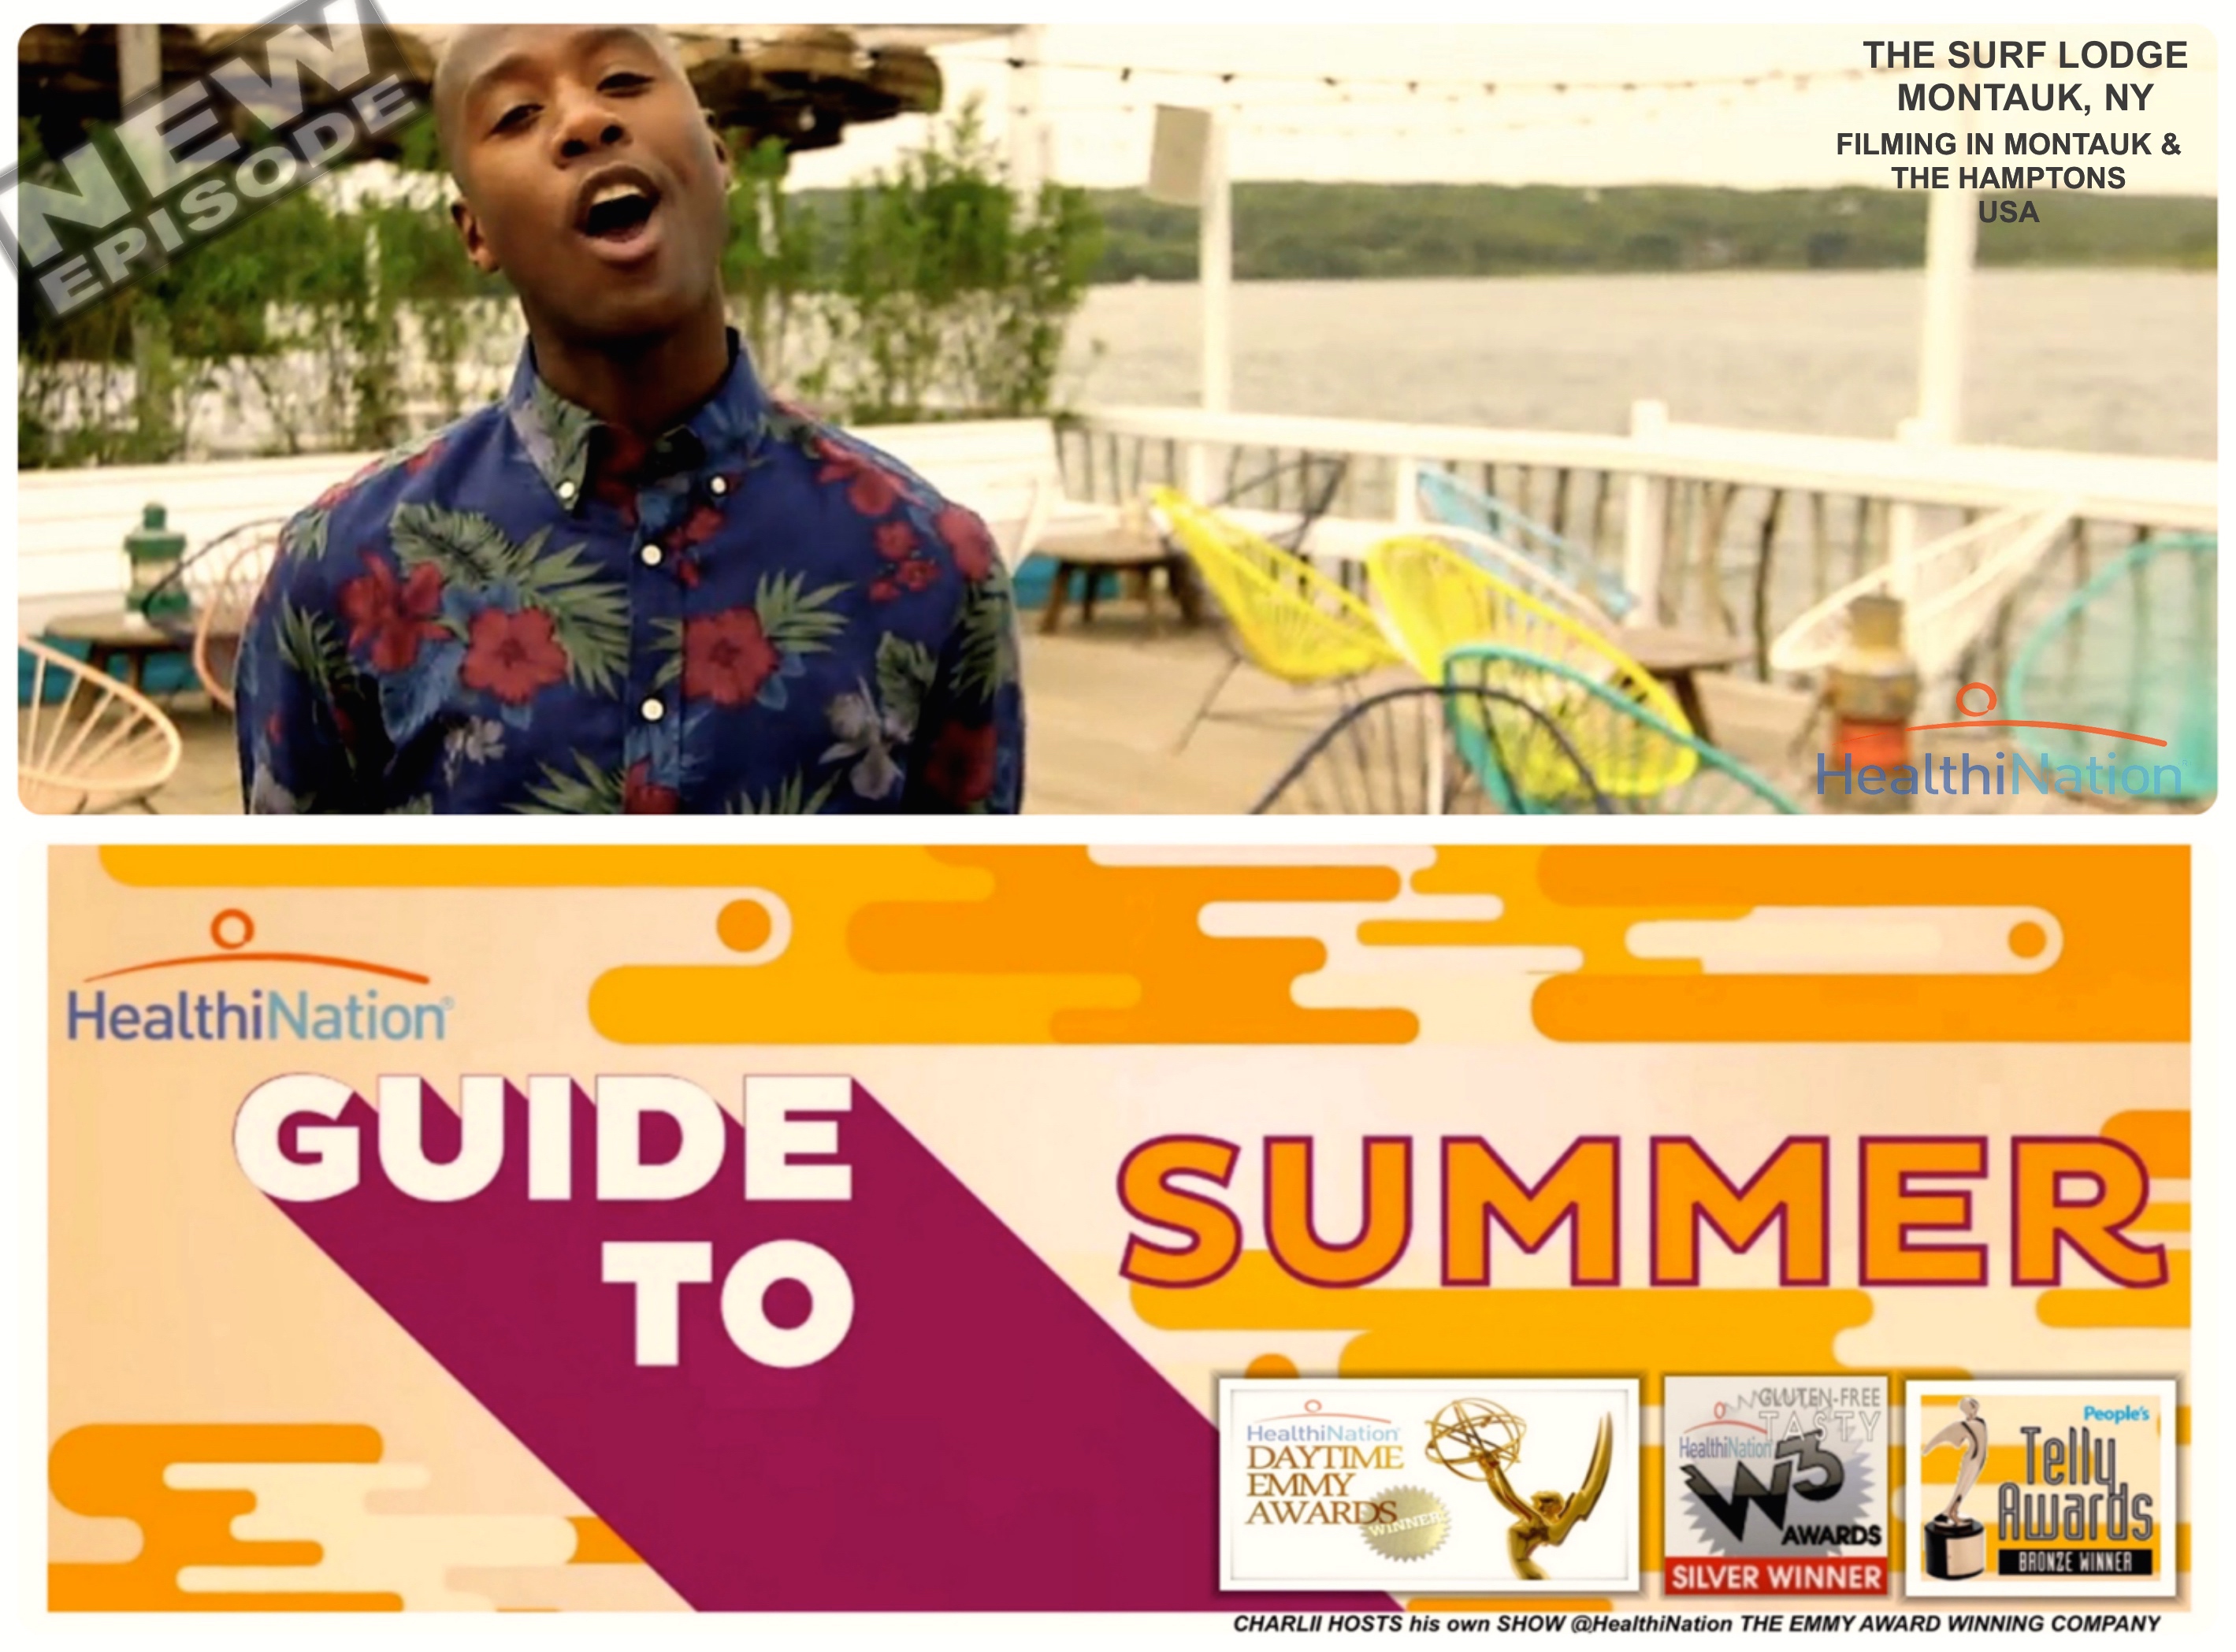 @HealthiNation (episode 3) On-Camera Host CHARLII.COM :How to make @TheSurfLodge their Signature 'Summer Salad' (filming@TheHamptons) https://www.linkedin.com/pulse/on-camera-host-charlii-summer-salads-thehamptons-montauk-?trk=mp-reader-card